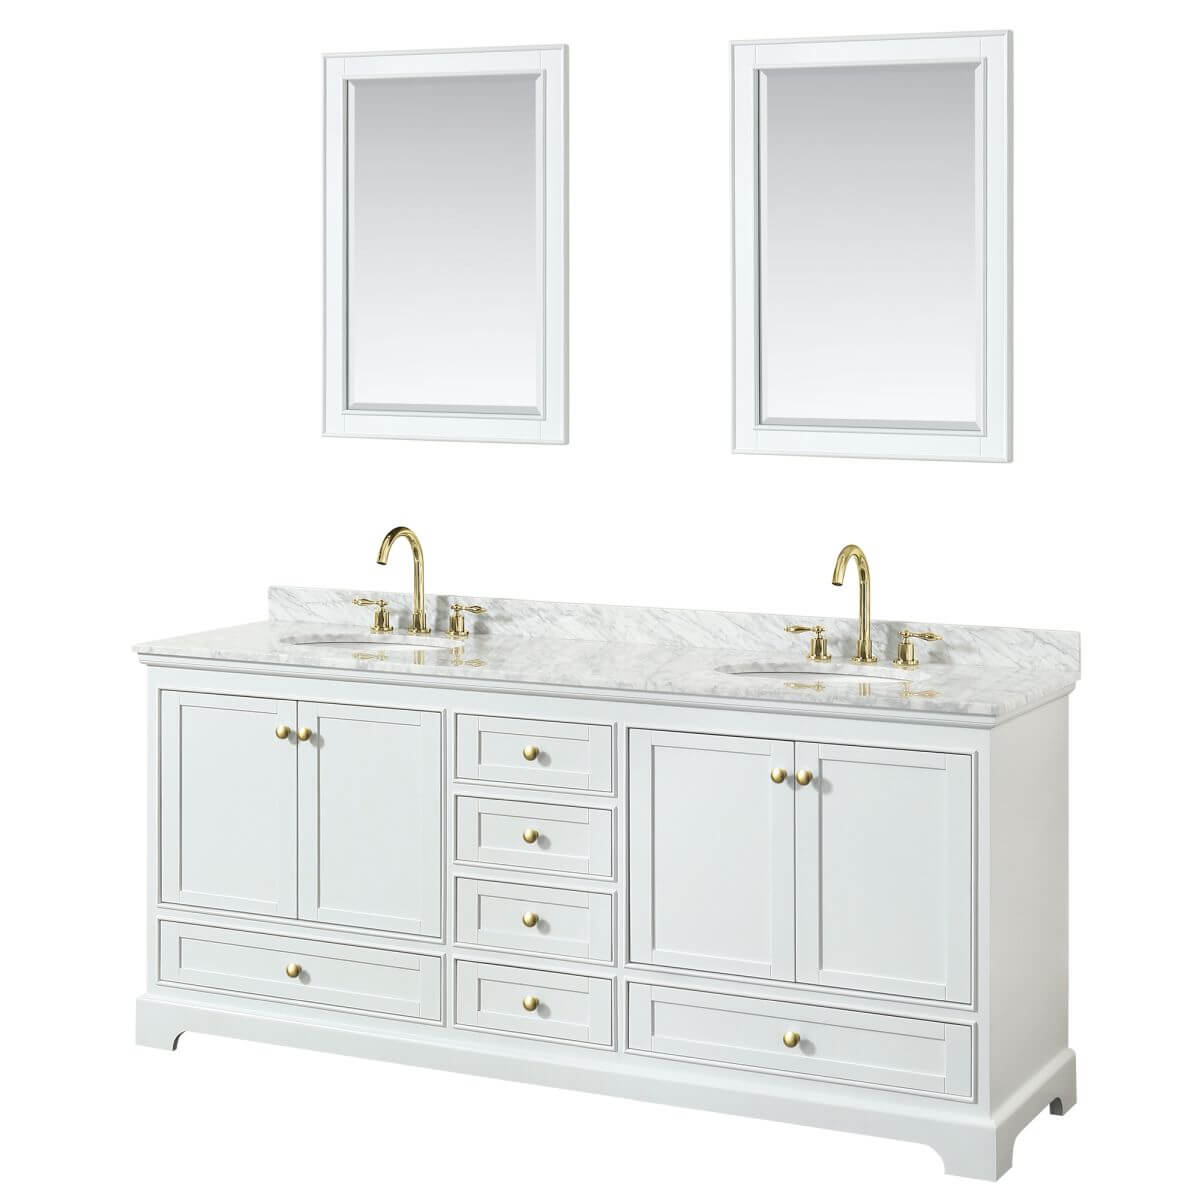 Wyndham Collection Deborah 80 inch Double Bathroom Vanity in White with White Carrara Marble Countertop, Undermount Oval Sinks, Brushed Gold Trim and 24 inch Mirrors - WCS202080DWGCMUNOM24